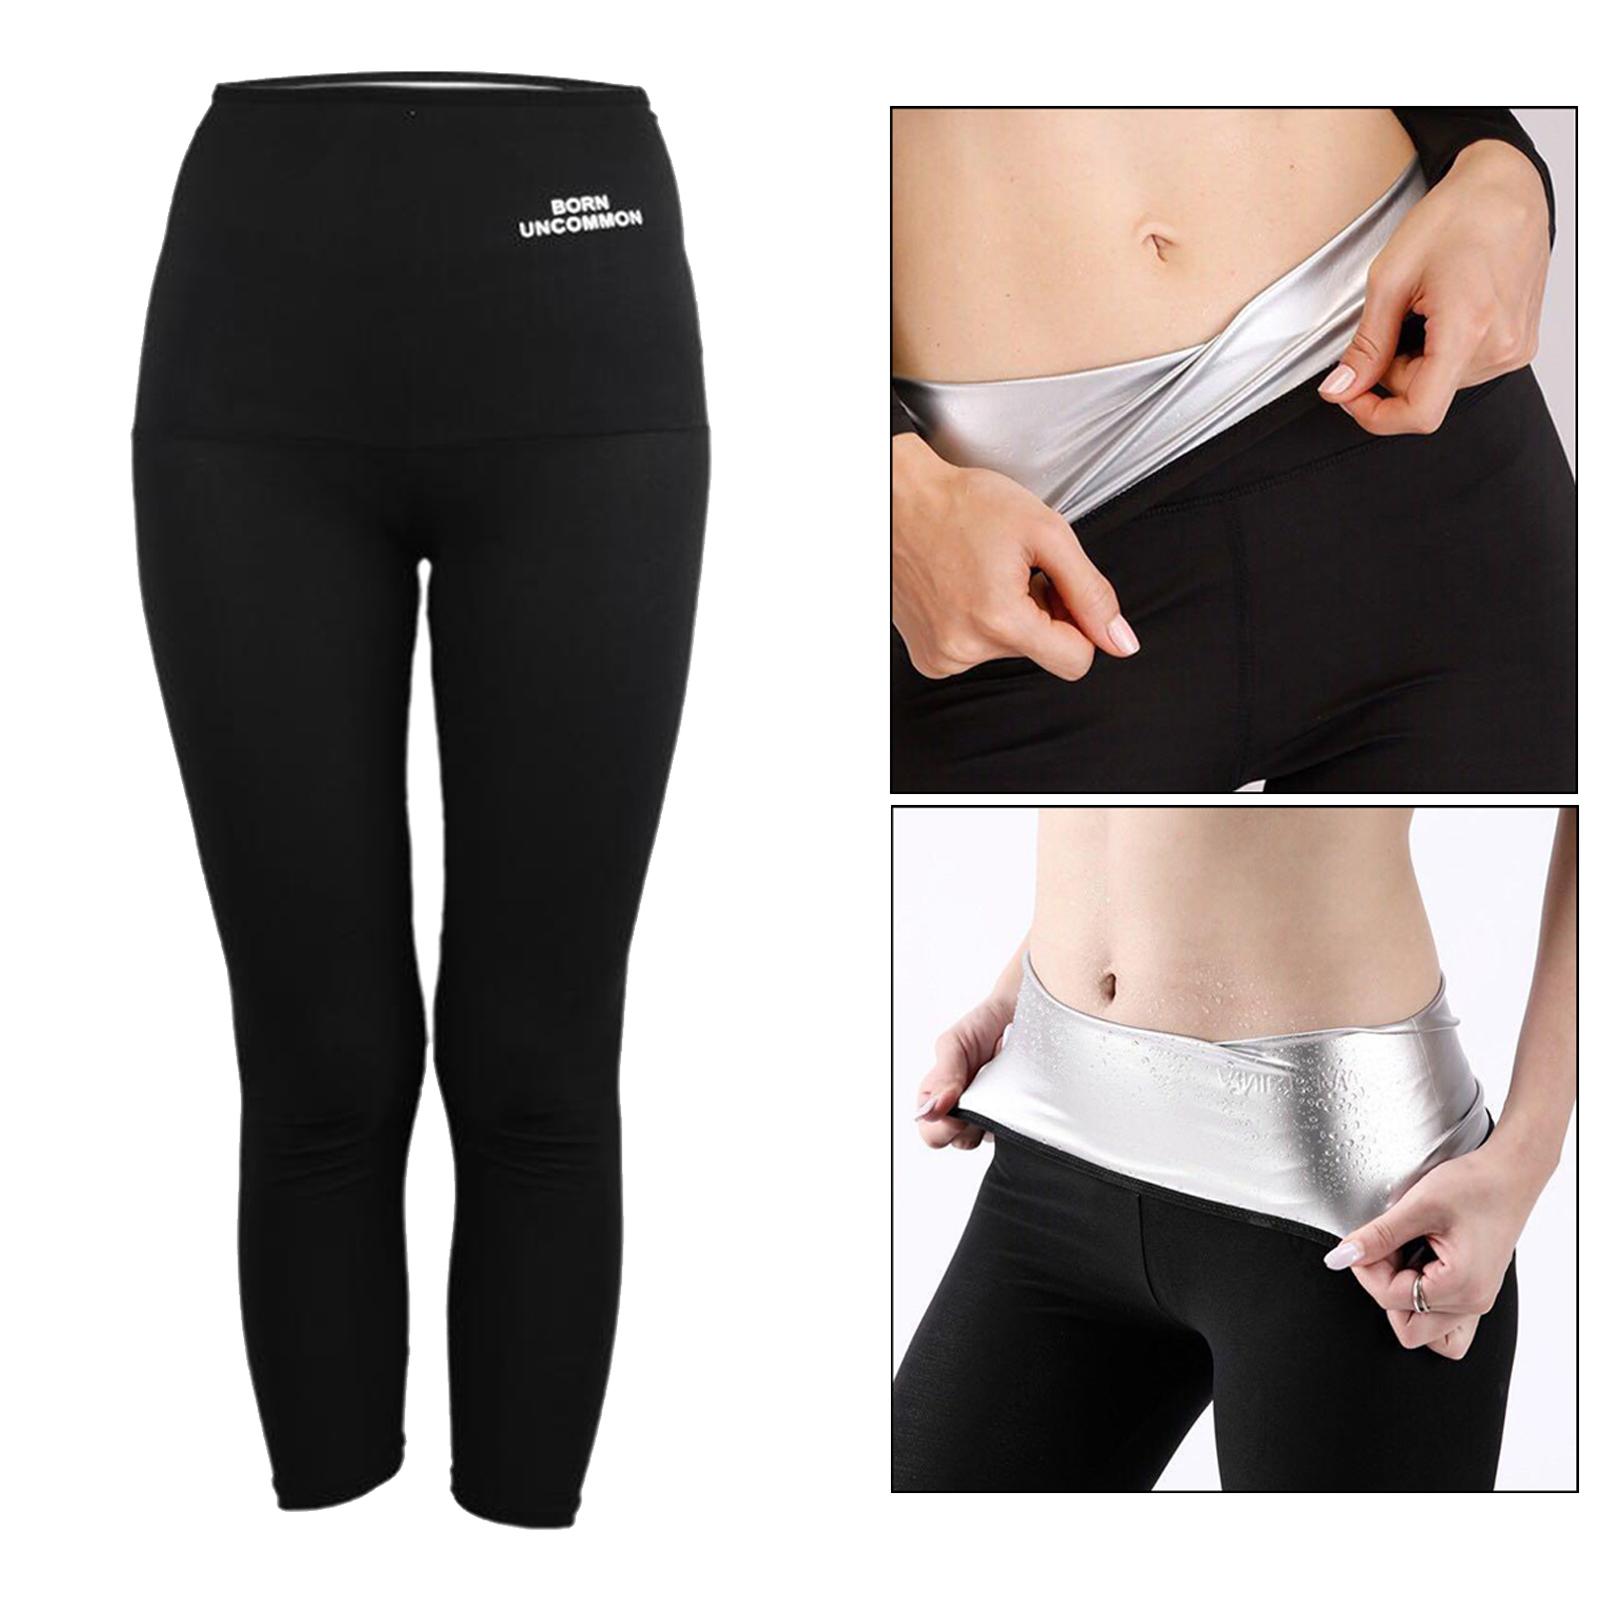 Sauna Shaper Pants For Women Weight Loss Thermal Sweat Capris Shorts High  Waist Butt Lifting Workout Leggings With Tummy Control - Shapers -  AliExpress